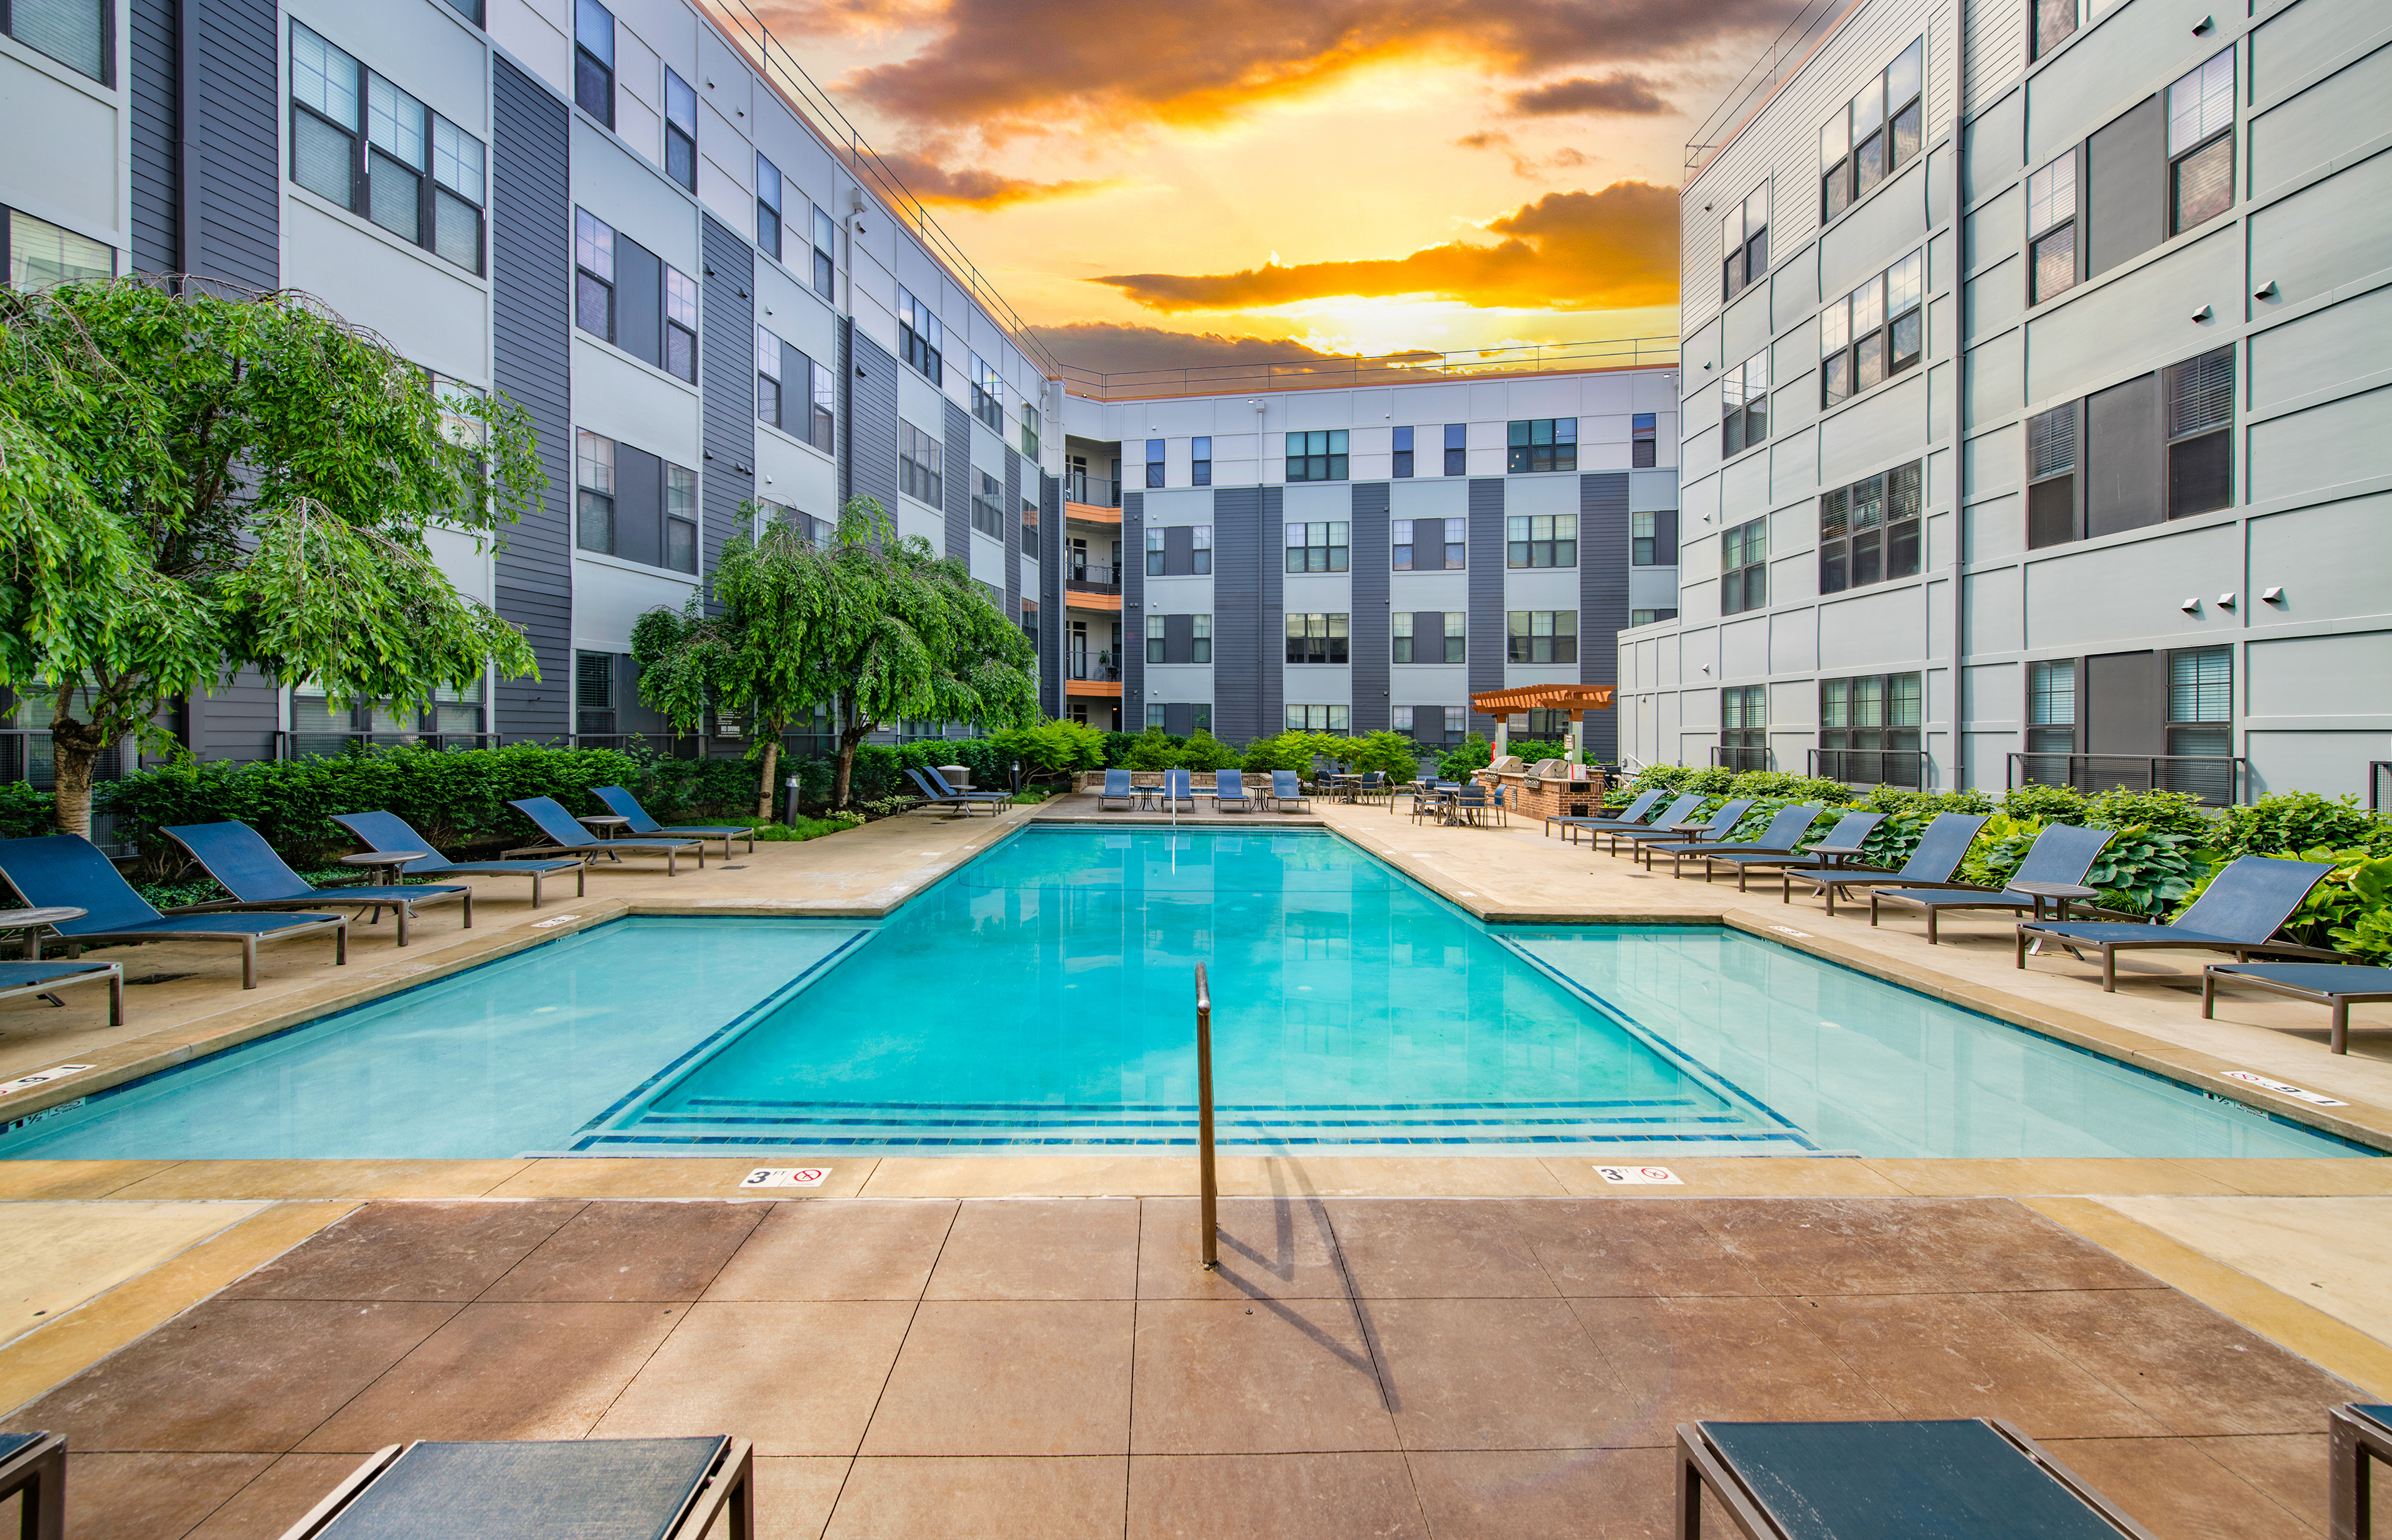 Wading pool with soaking lounge area at Market Station luxury apartments in Kansas City, MO